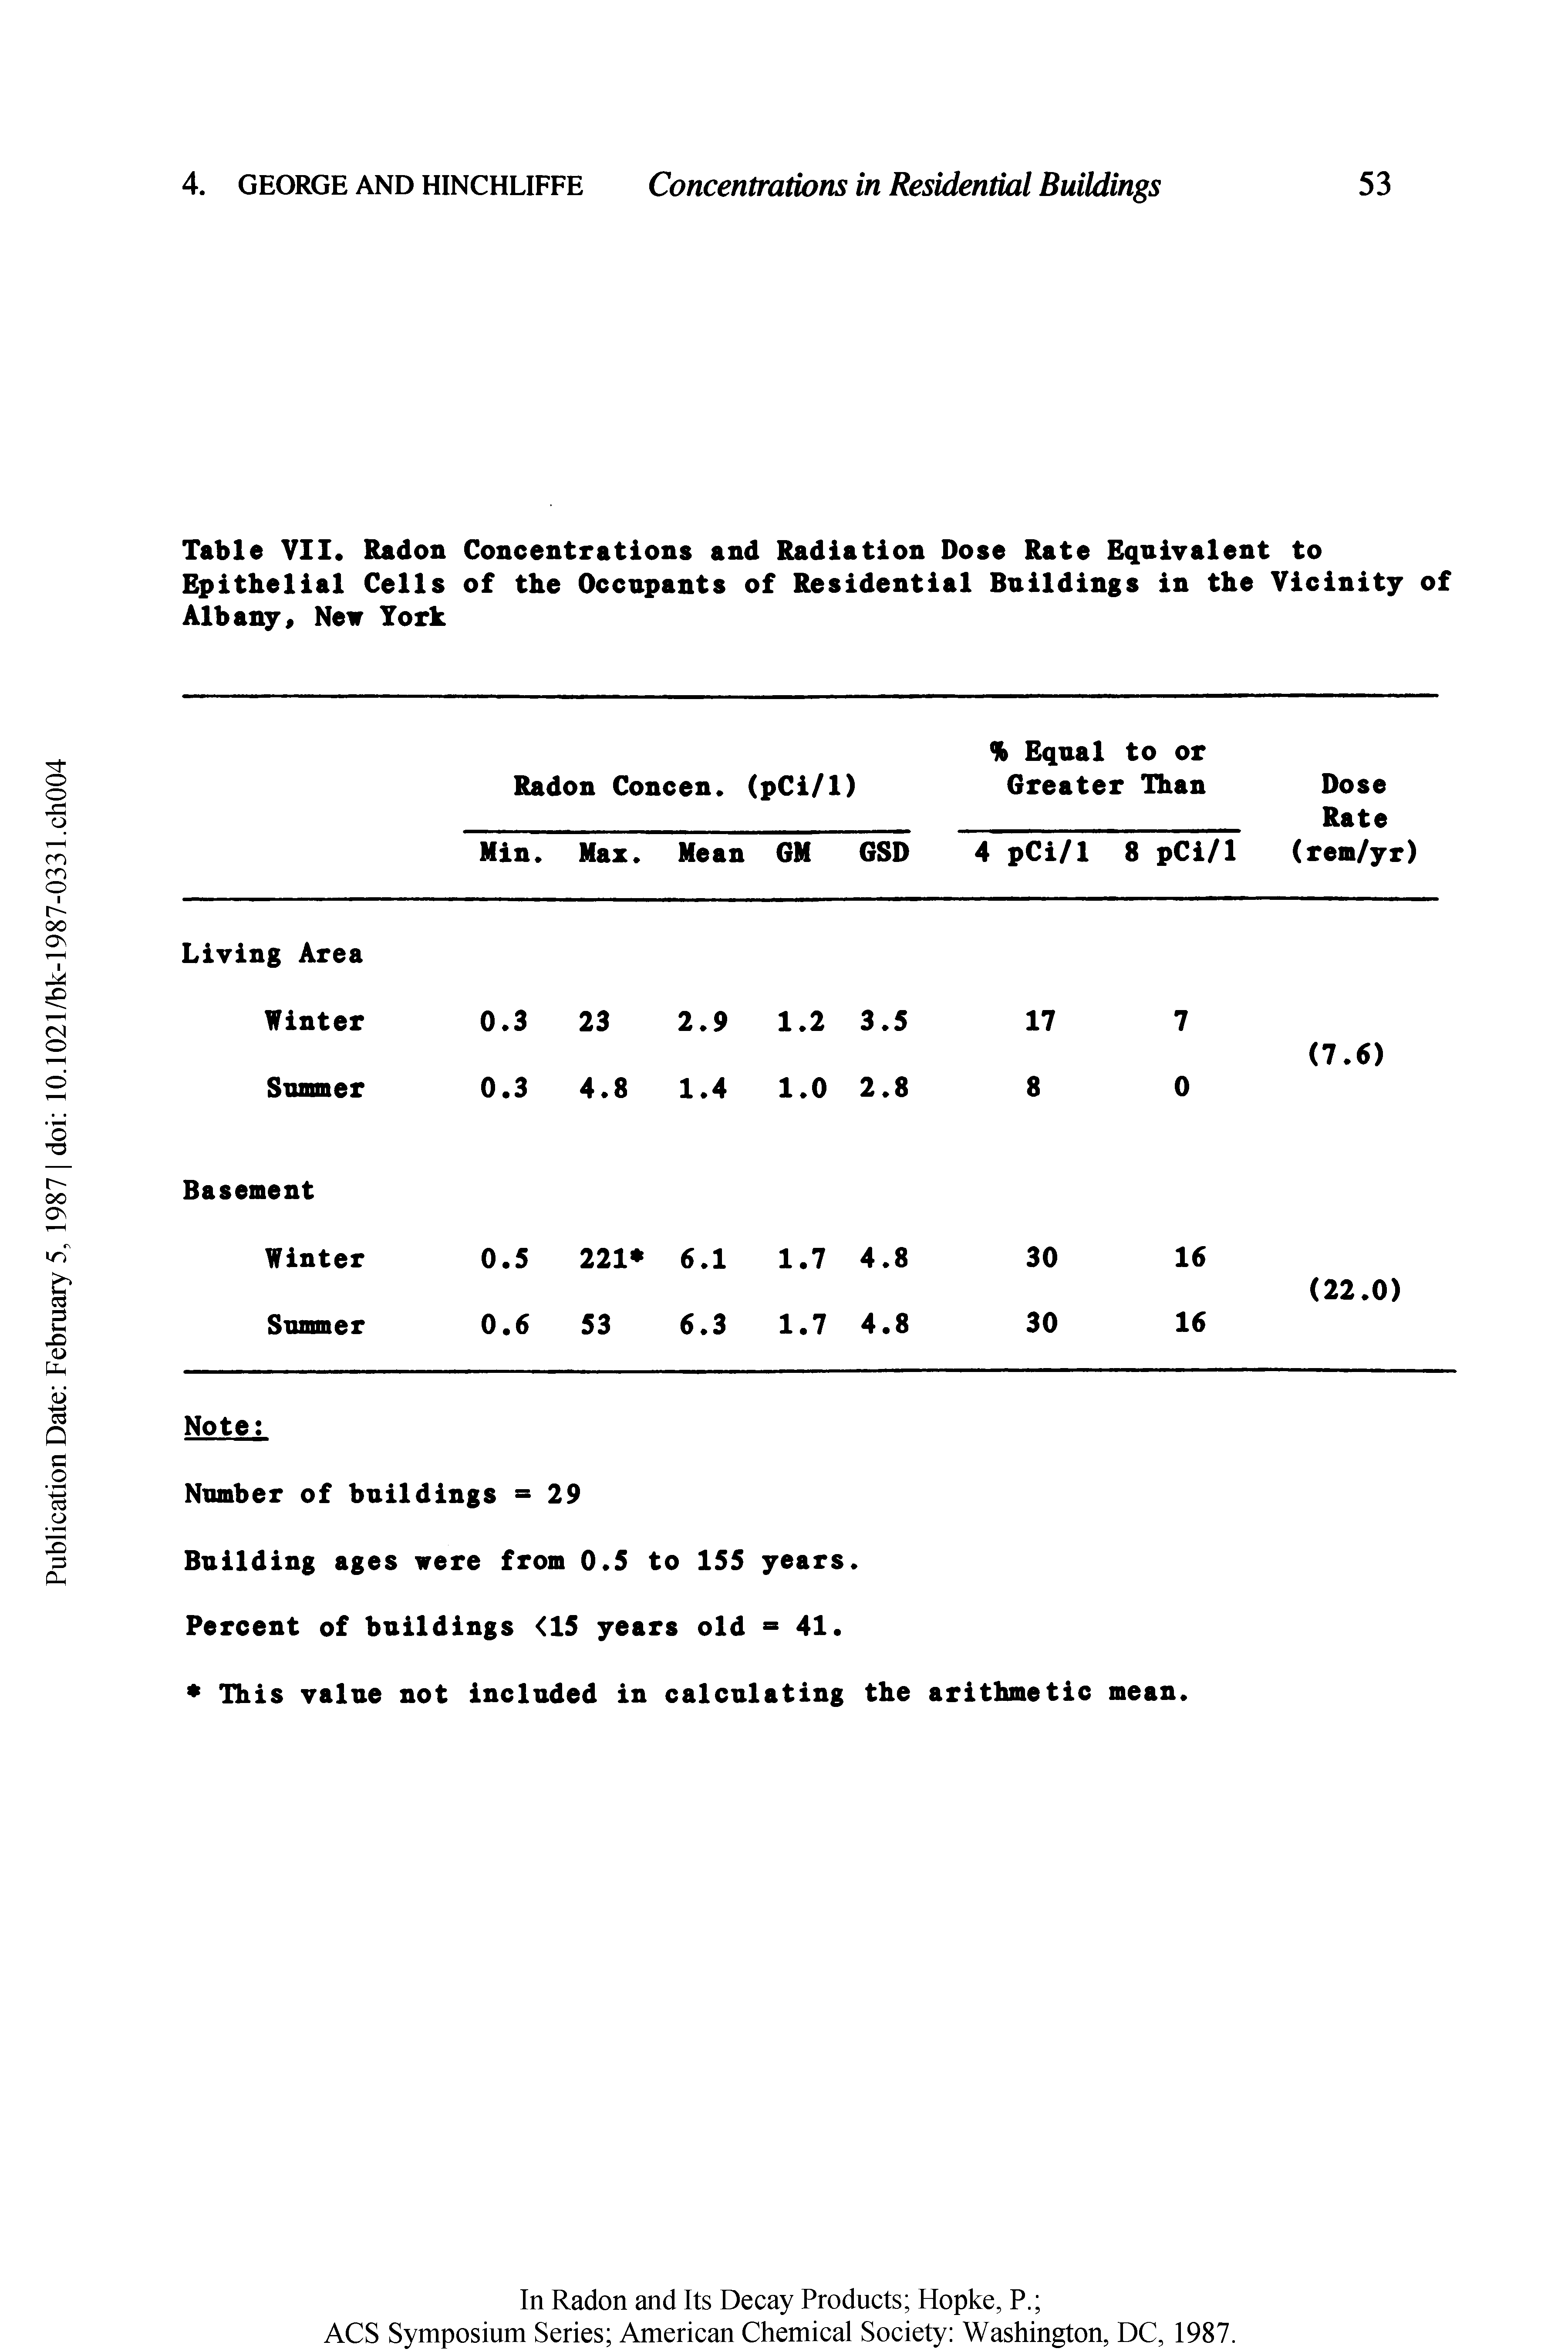 Table VII. Radon Concentrations and Radiation Dose Rate Equivalent to Epithelial Cells of the Occupants of Residential Buildings in the Vicinity of Albany, New York...